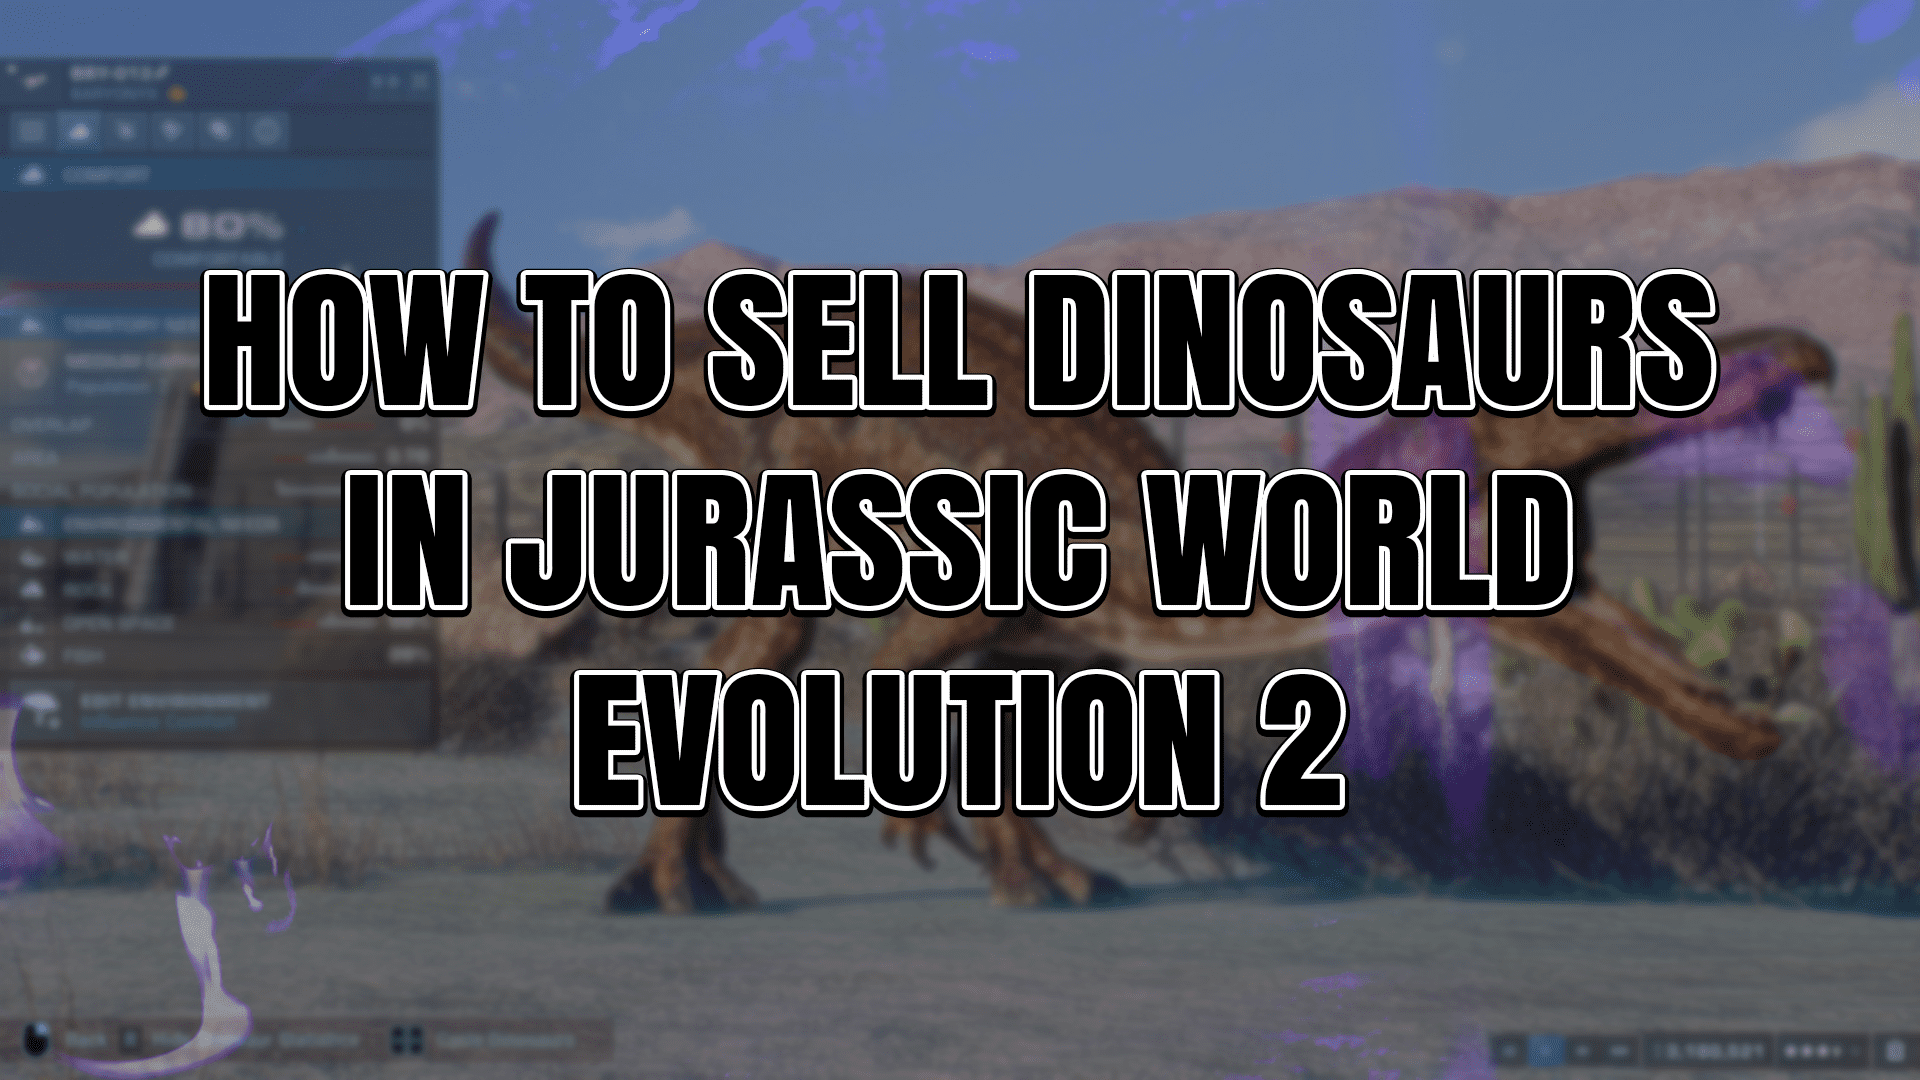 How to Sell Dinosaurs in Jurassic World Evolution 2